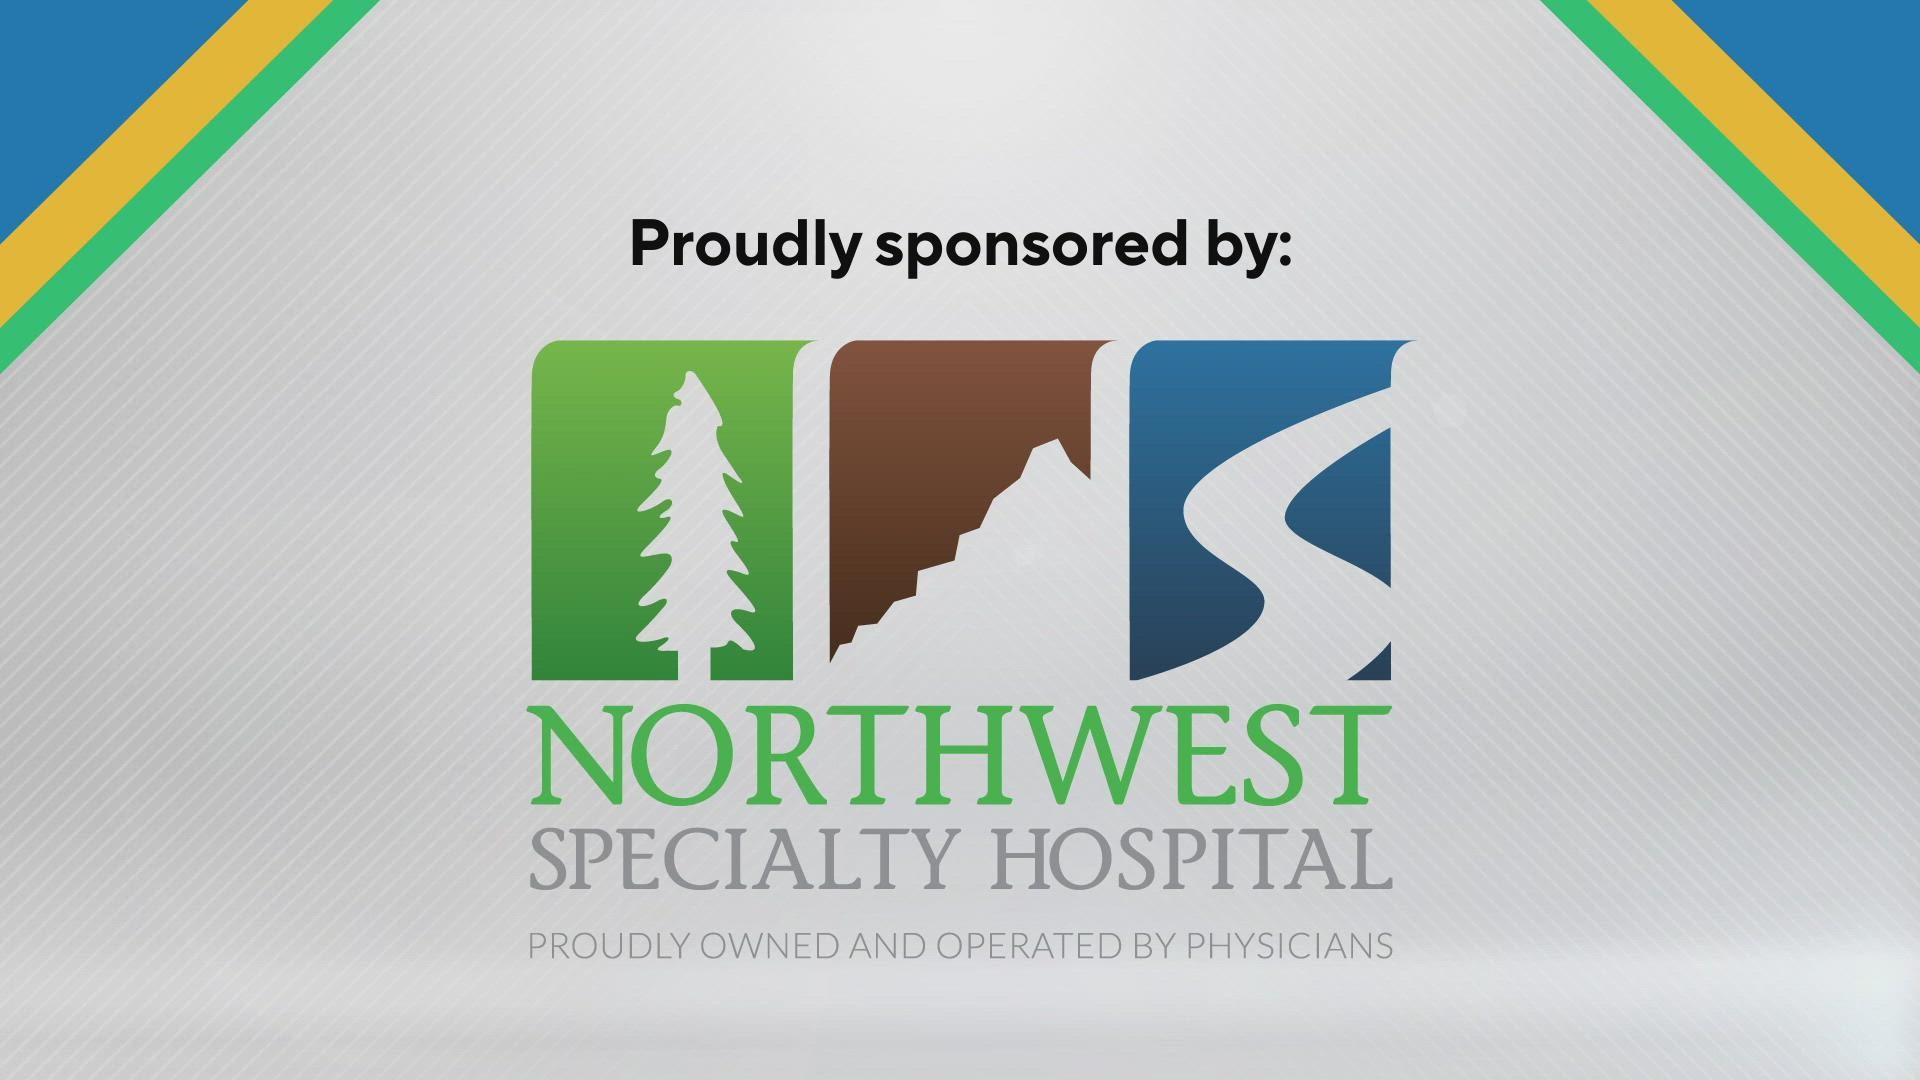 Northwest Specialty Hospital has been consistently ranked among the top hospitals in the nation. Watch the video to find out why.